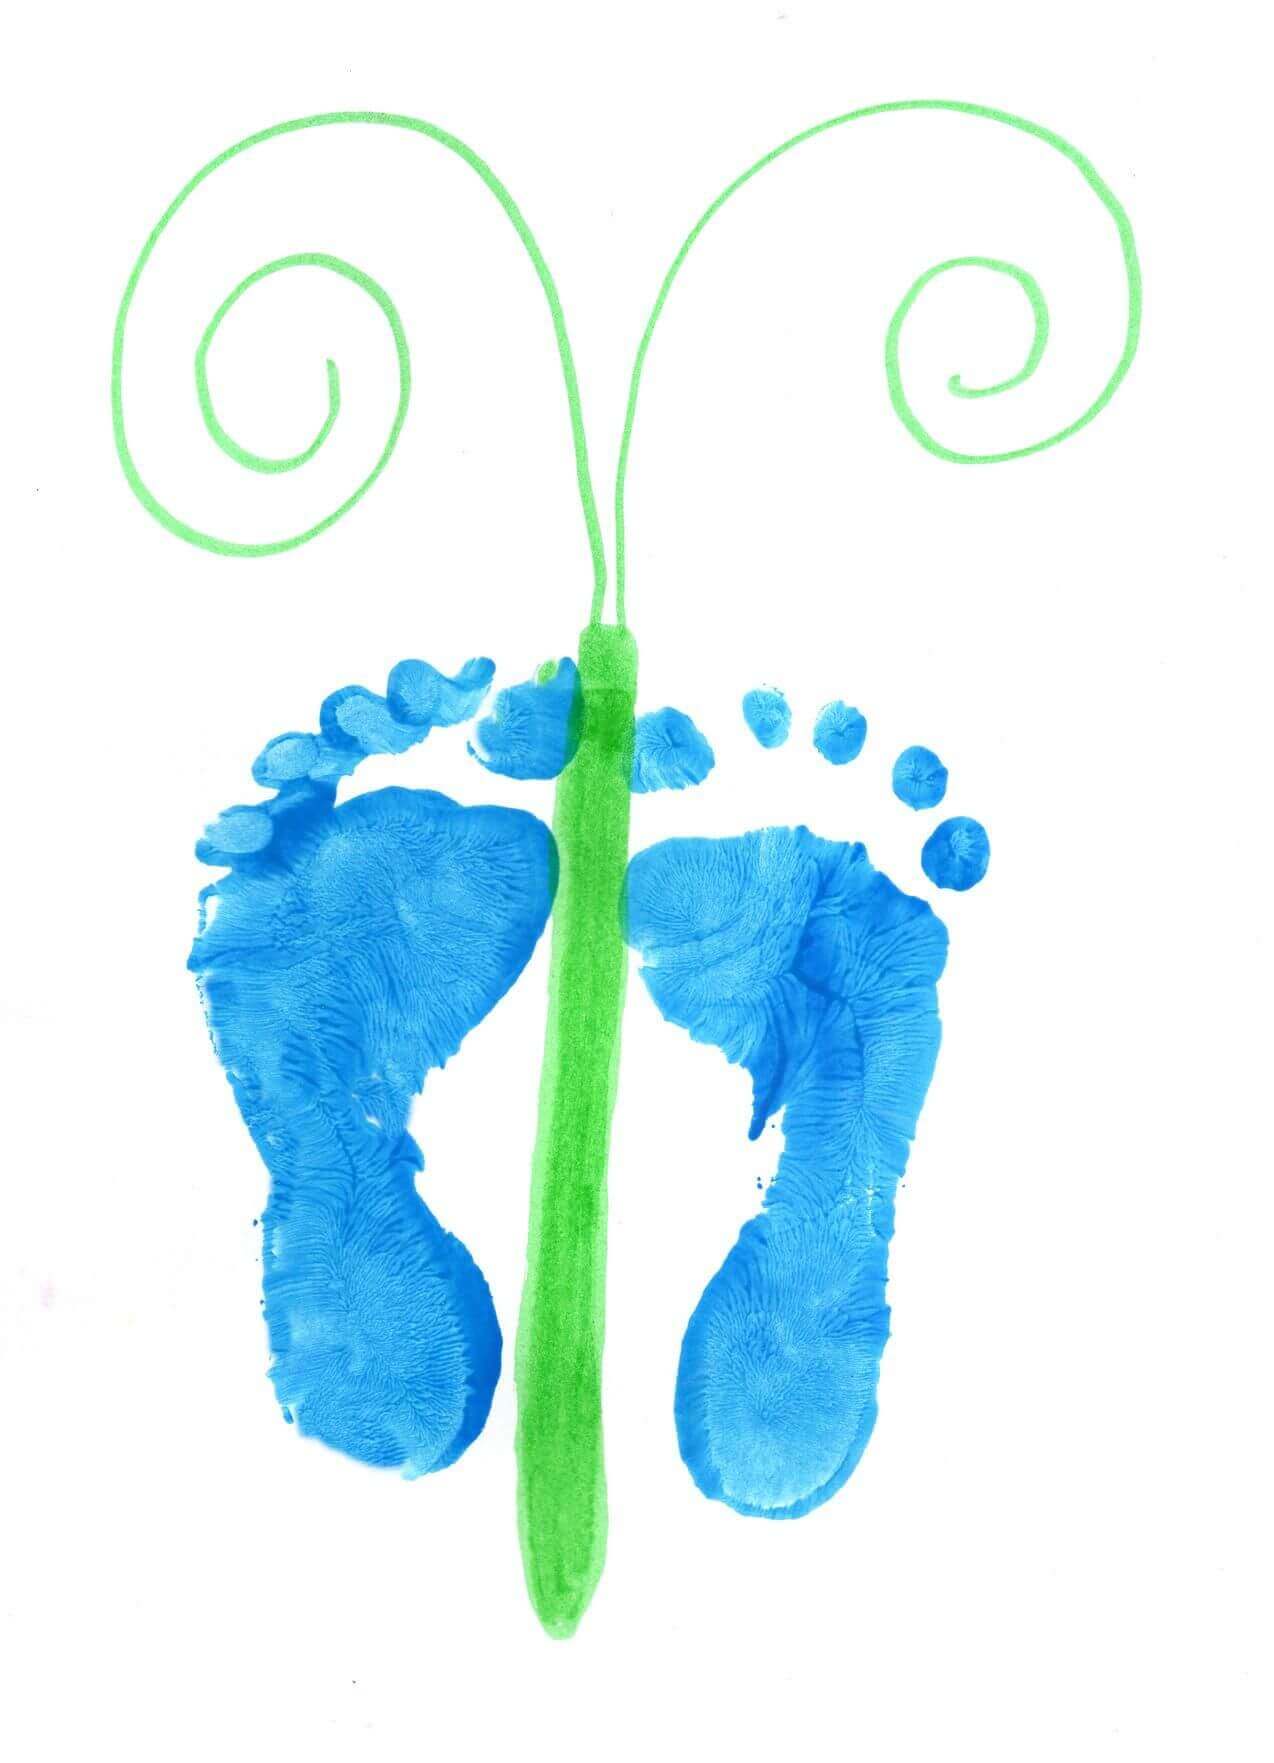 Sofia Aveiro’s last art project, which includes her footprints, inspired the Sofia Foundation’s logo. PHOTO: THE SOFIA FOUNDATION